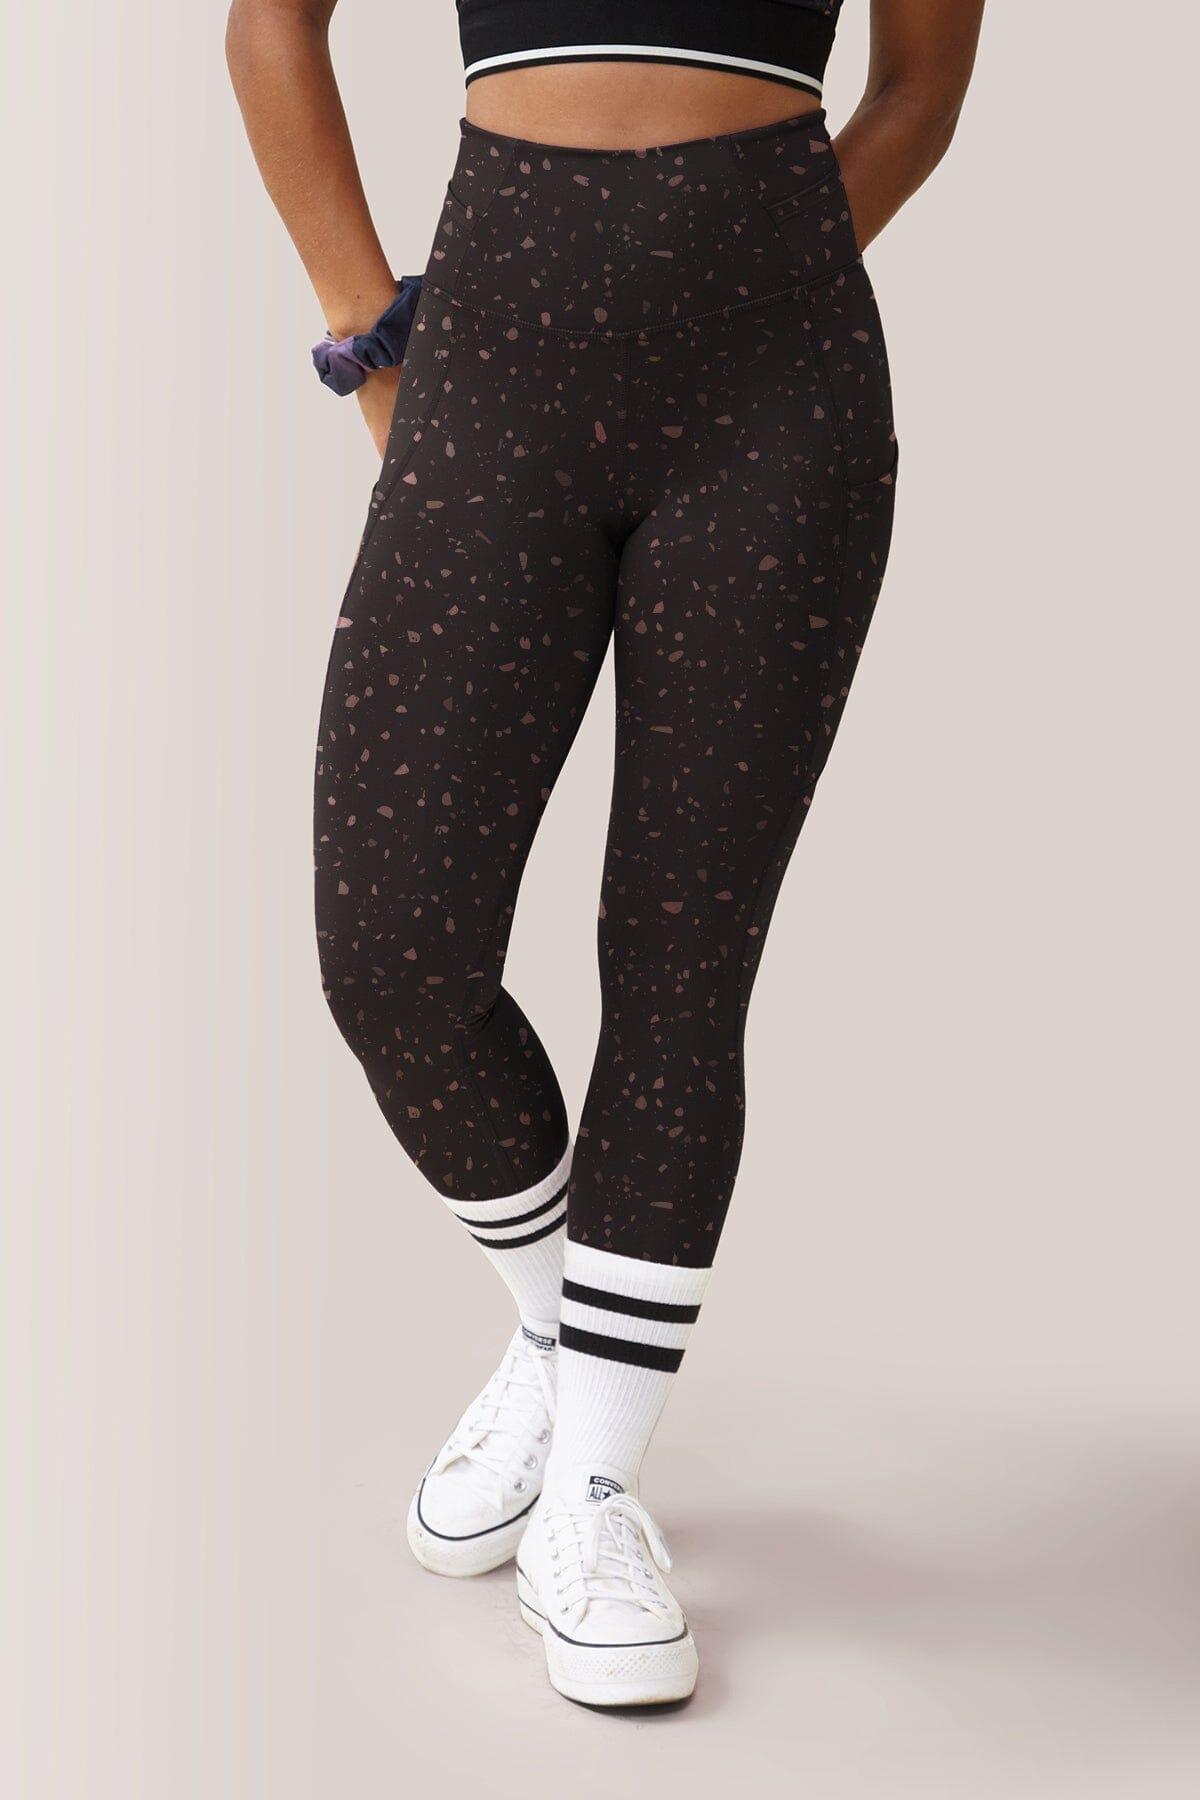 Femme portant les leggings avec pochettes Everyday de Rose Boreal./ Women wearing the Everyday Legging with pockets by Rose Boreal. -Terrazzo